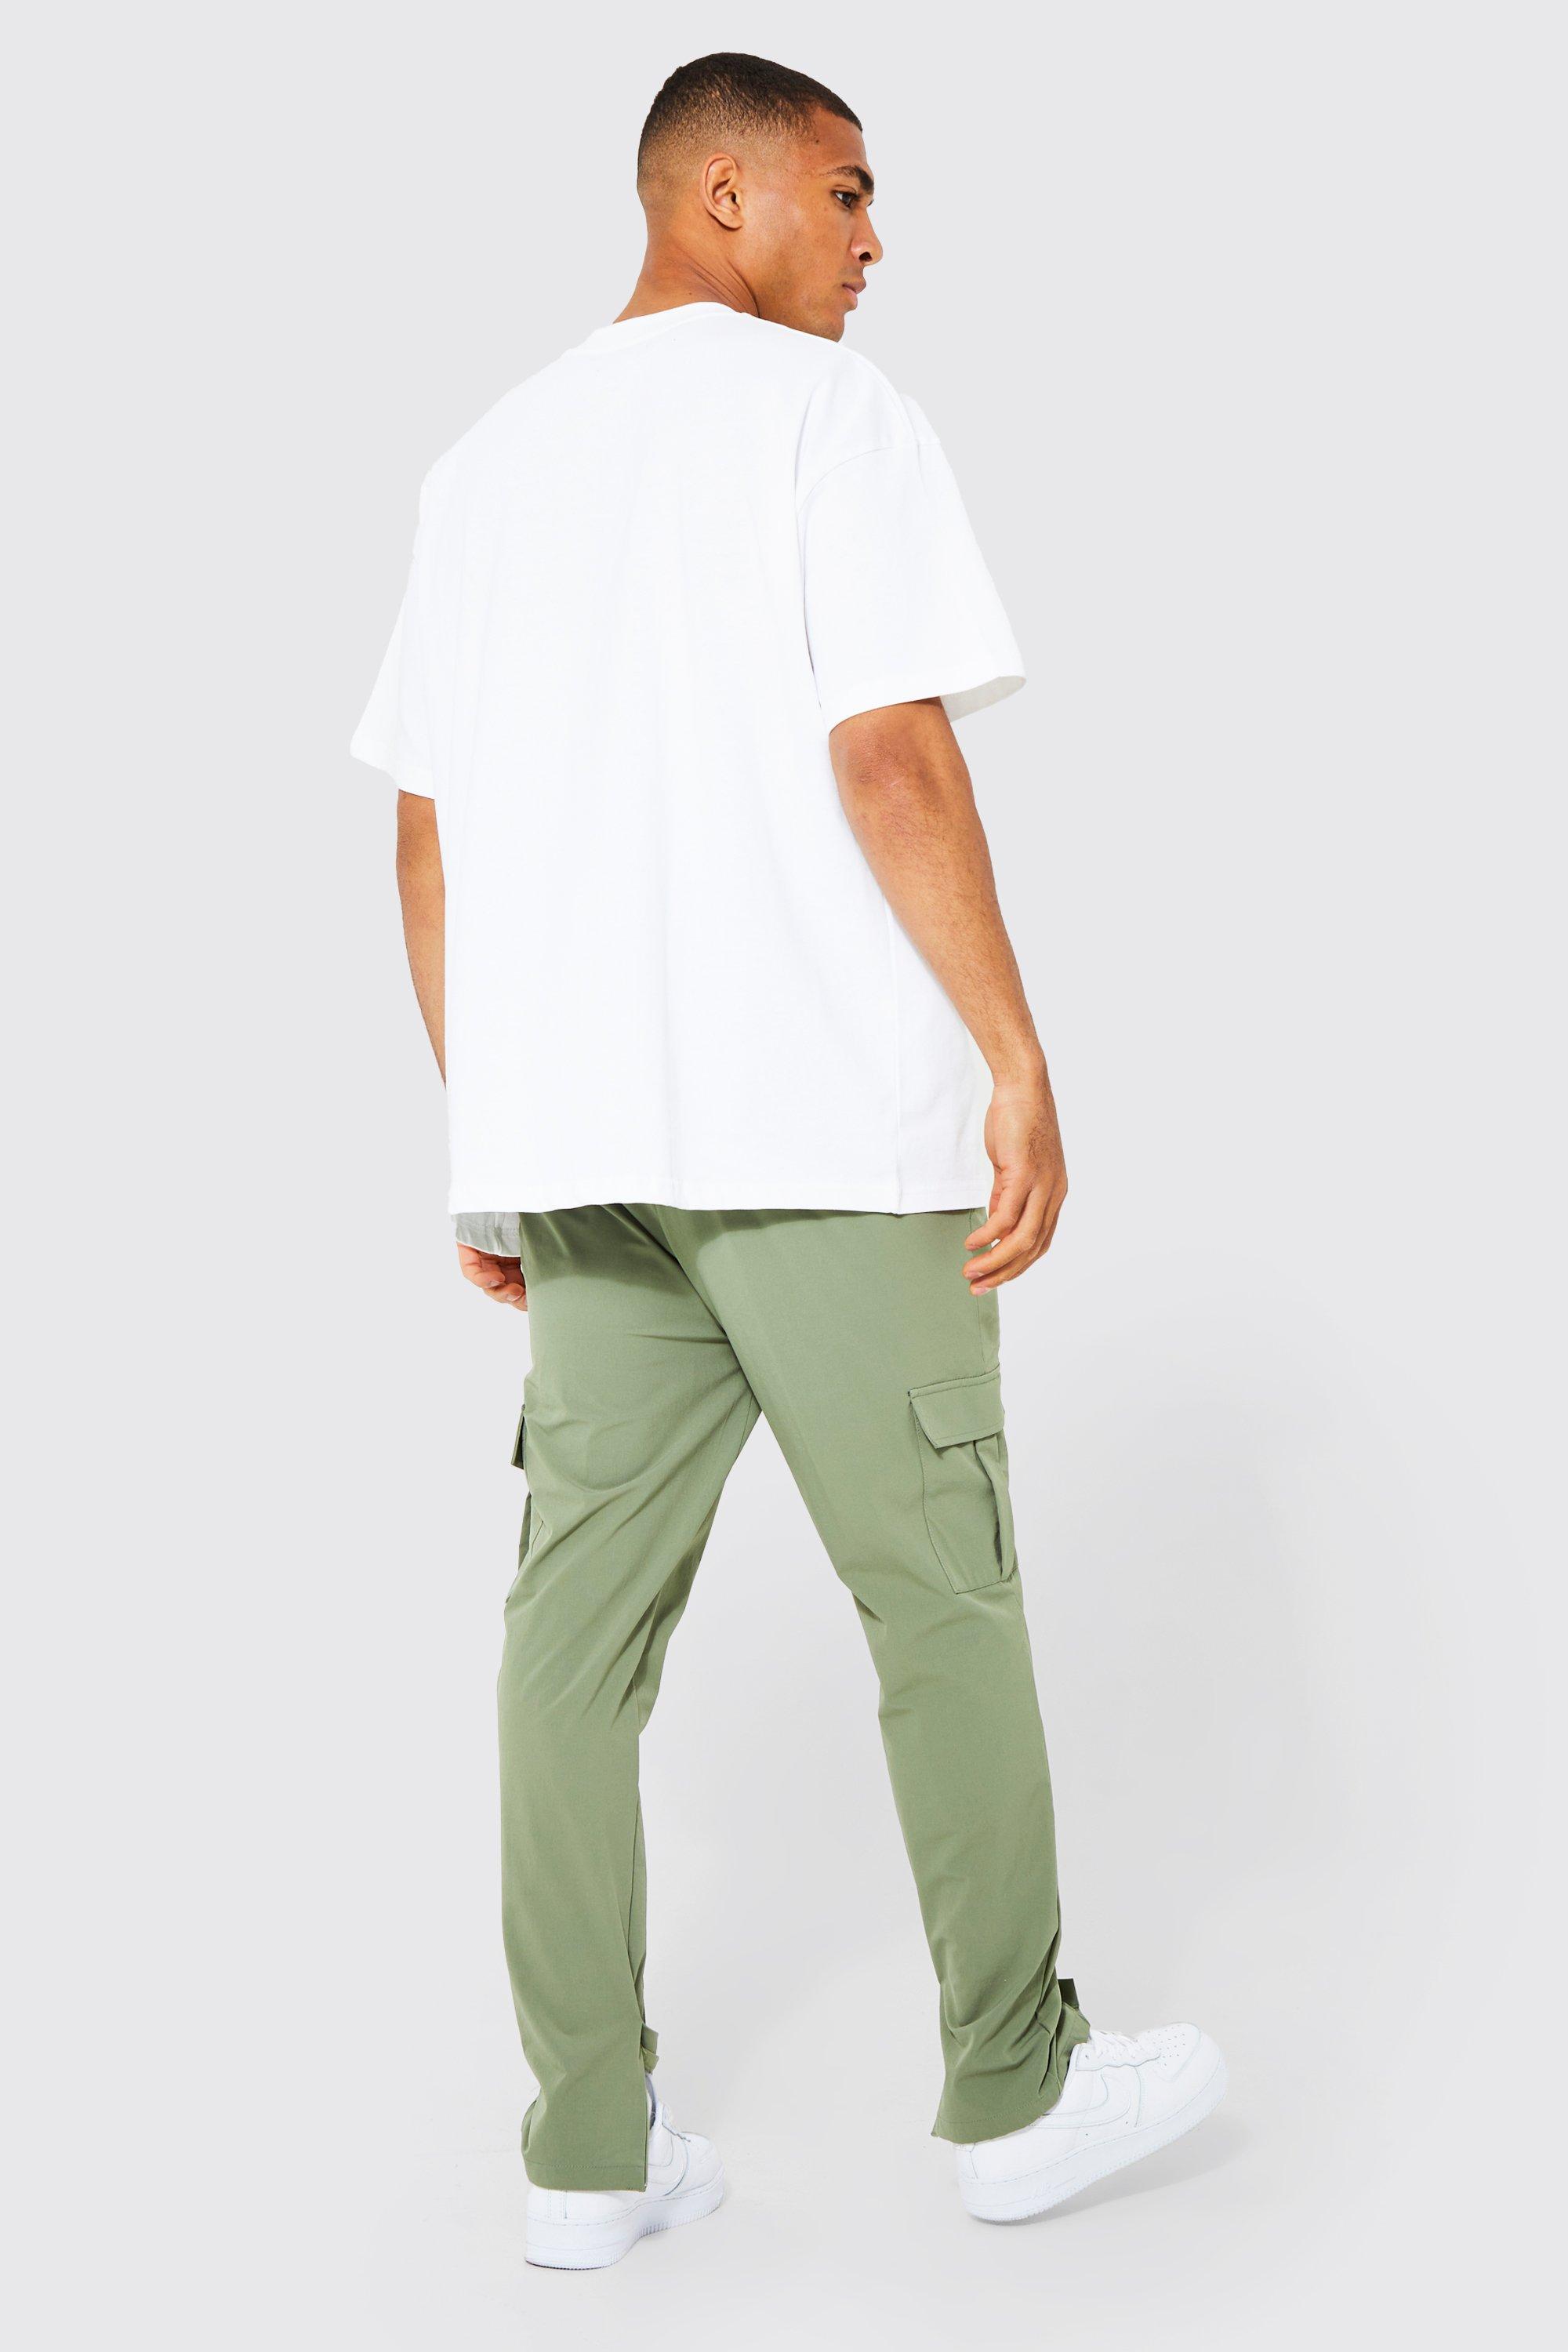 Mens - Woven Joggers in Olive Khaki